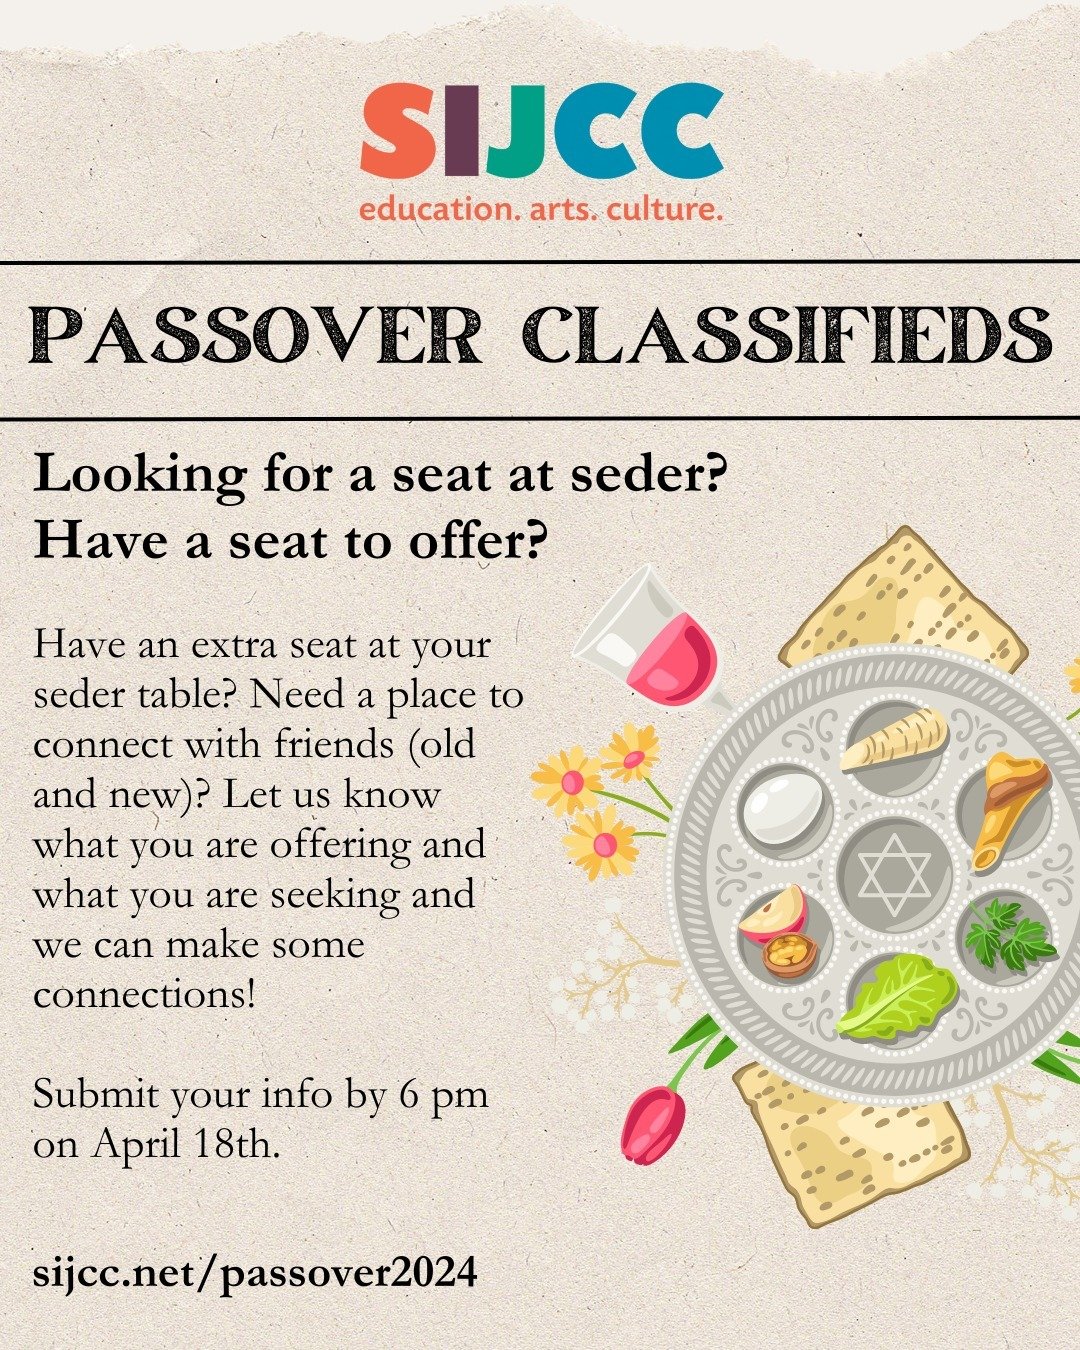 Have an extra seat at your seder table this Passover? Need a place to connect with friends (old and new)? Let us know what you are offering and what you are seeking and we can make some connections! ⁠
⁠
Submit your info at sijcc.net/passover2024.⁠
⁠
